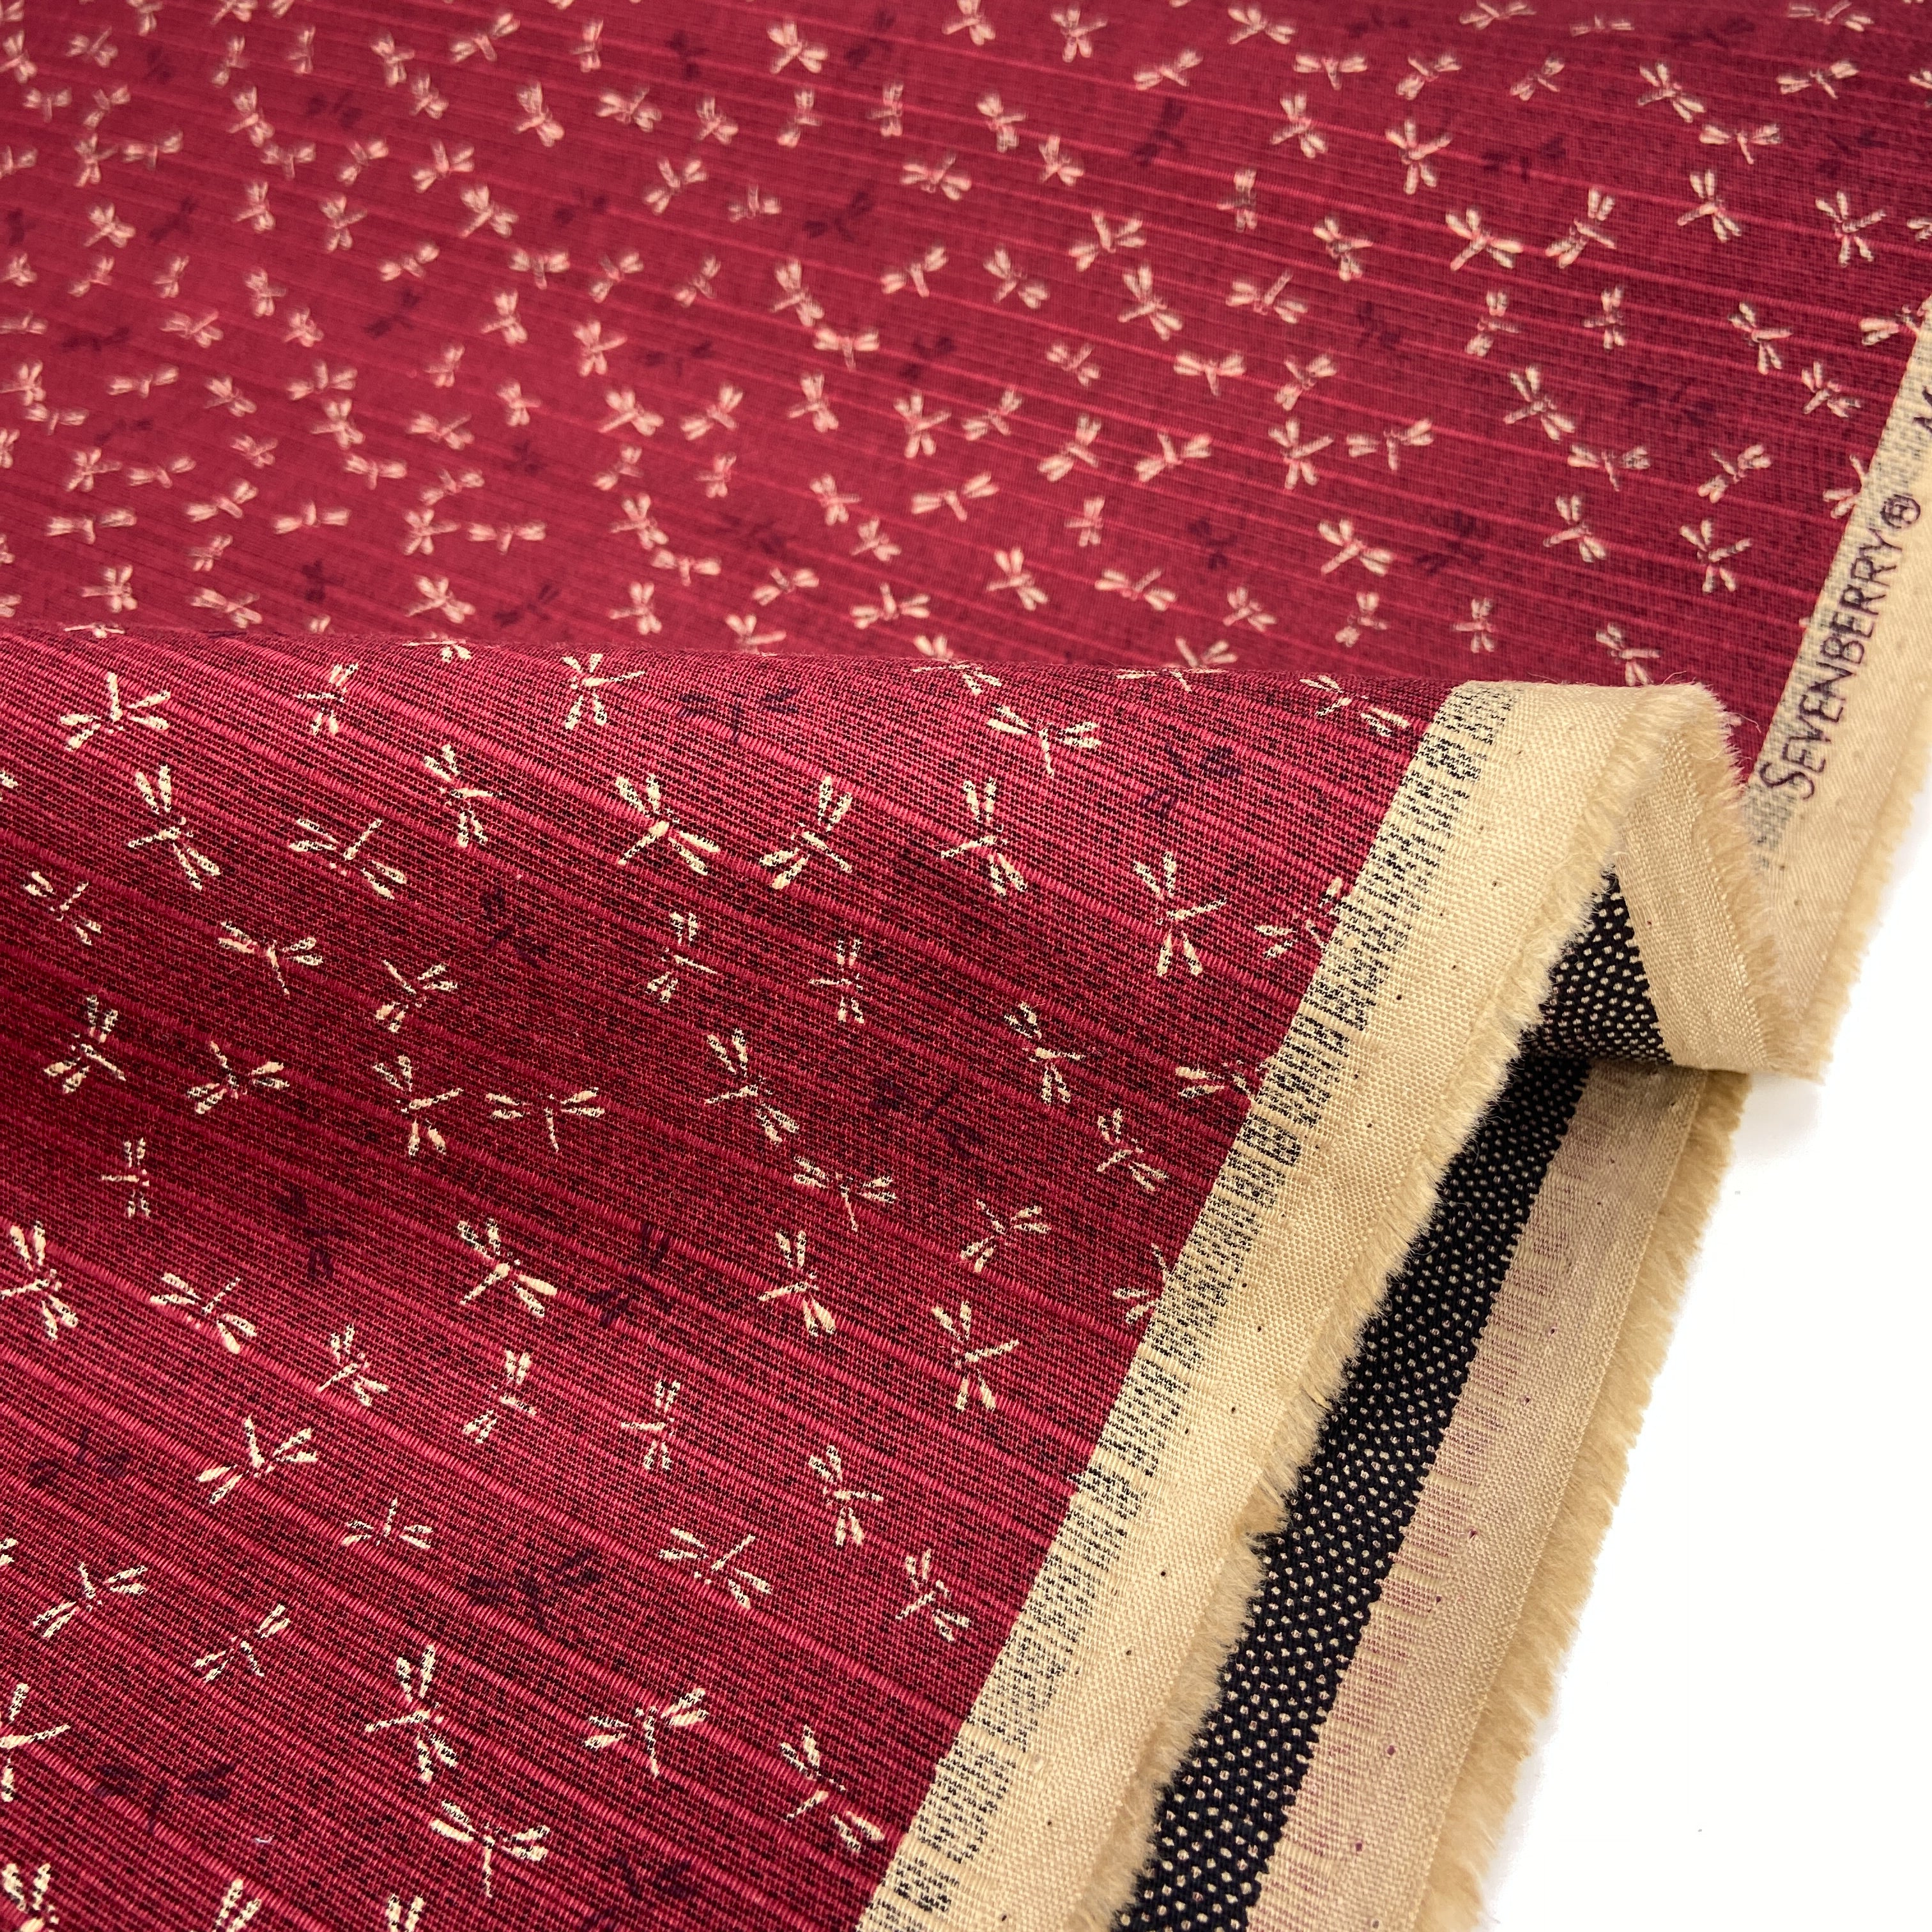 Japanese Cotton Shantung Dobby Print - Red Dragonfly and Black Shark Skin